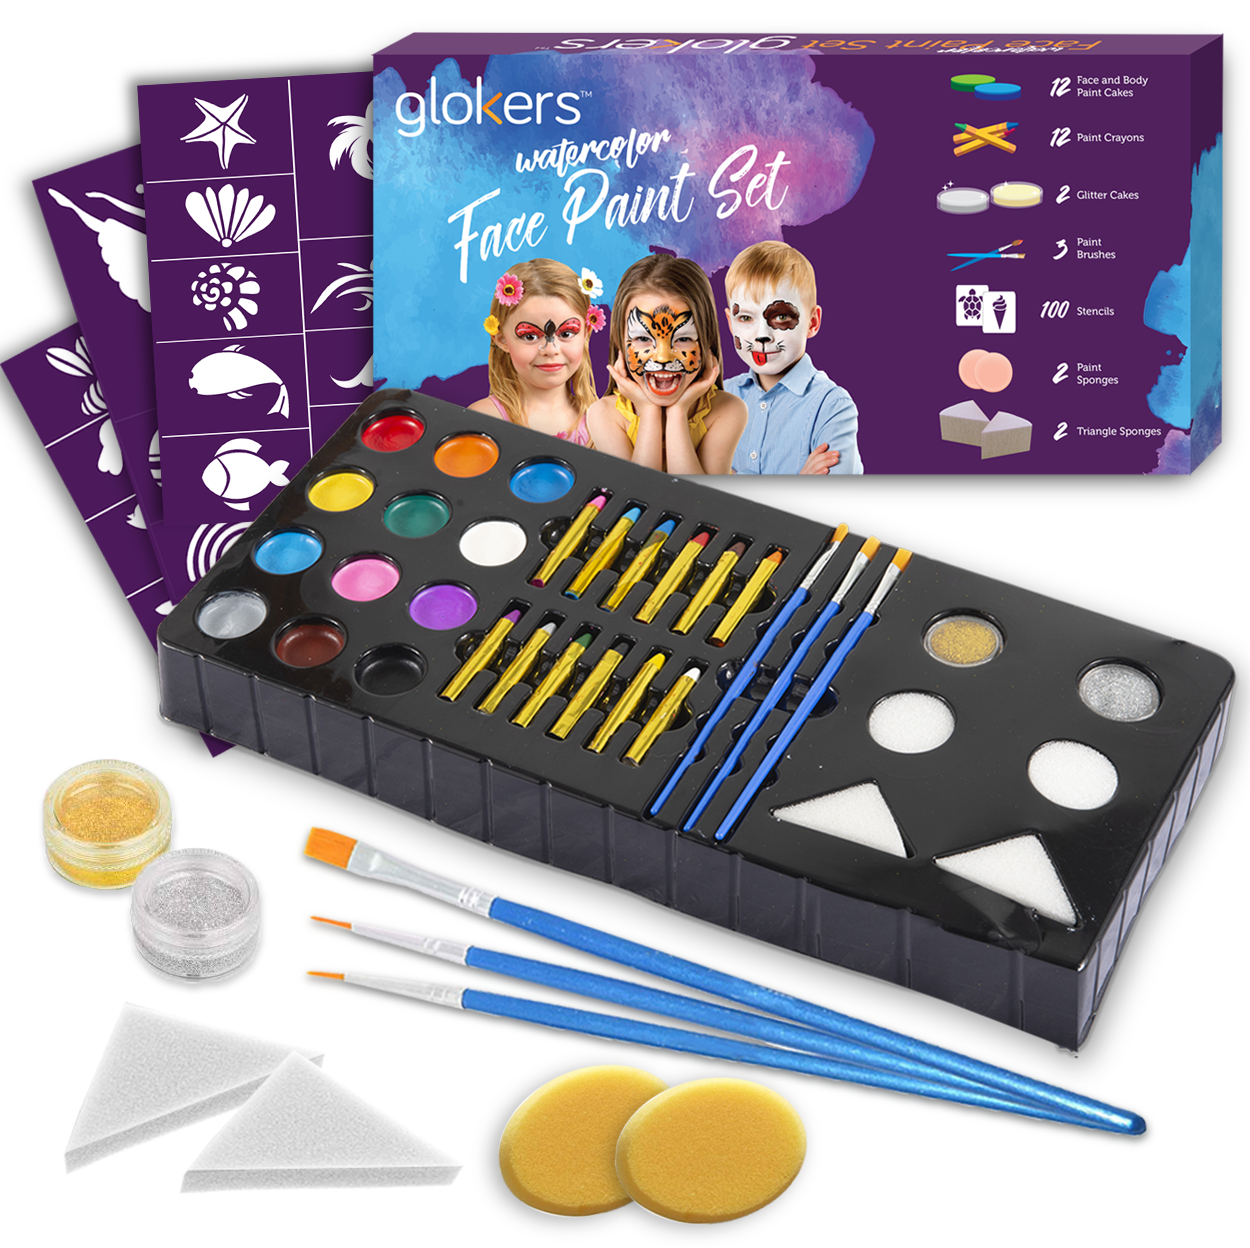 glokers Watercolor Complete Face Paint kit for Kids & Adults Great for Halloween